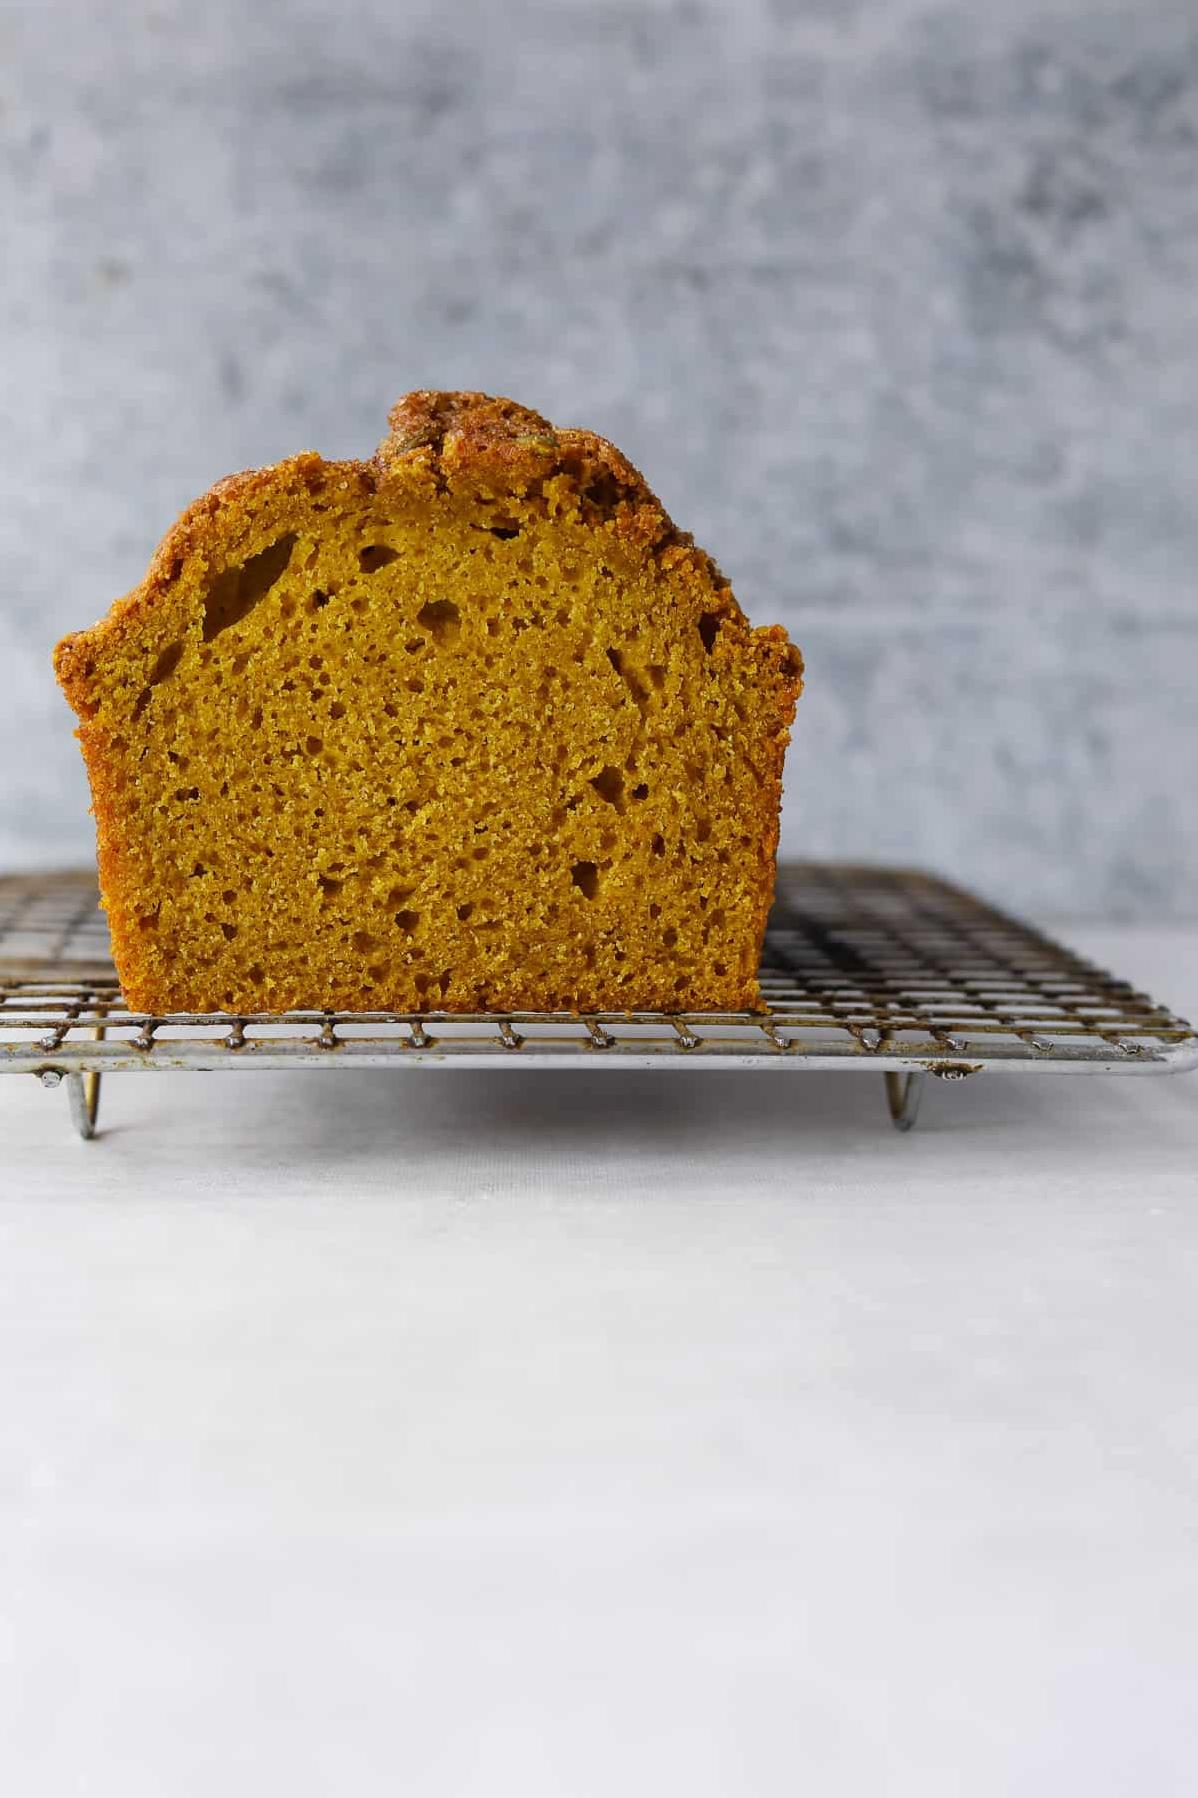  Did someone say pumpkin spice latte? Enjoy it with this loaf!